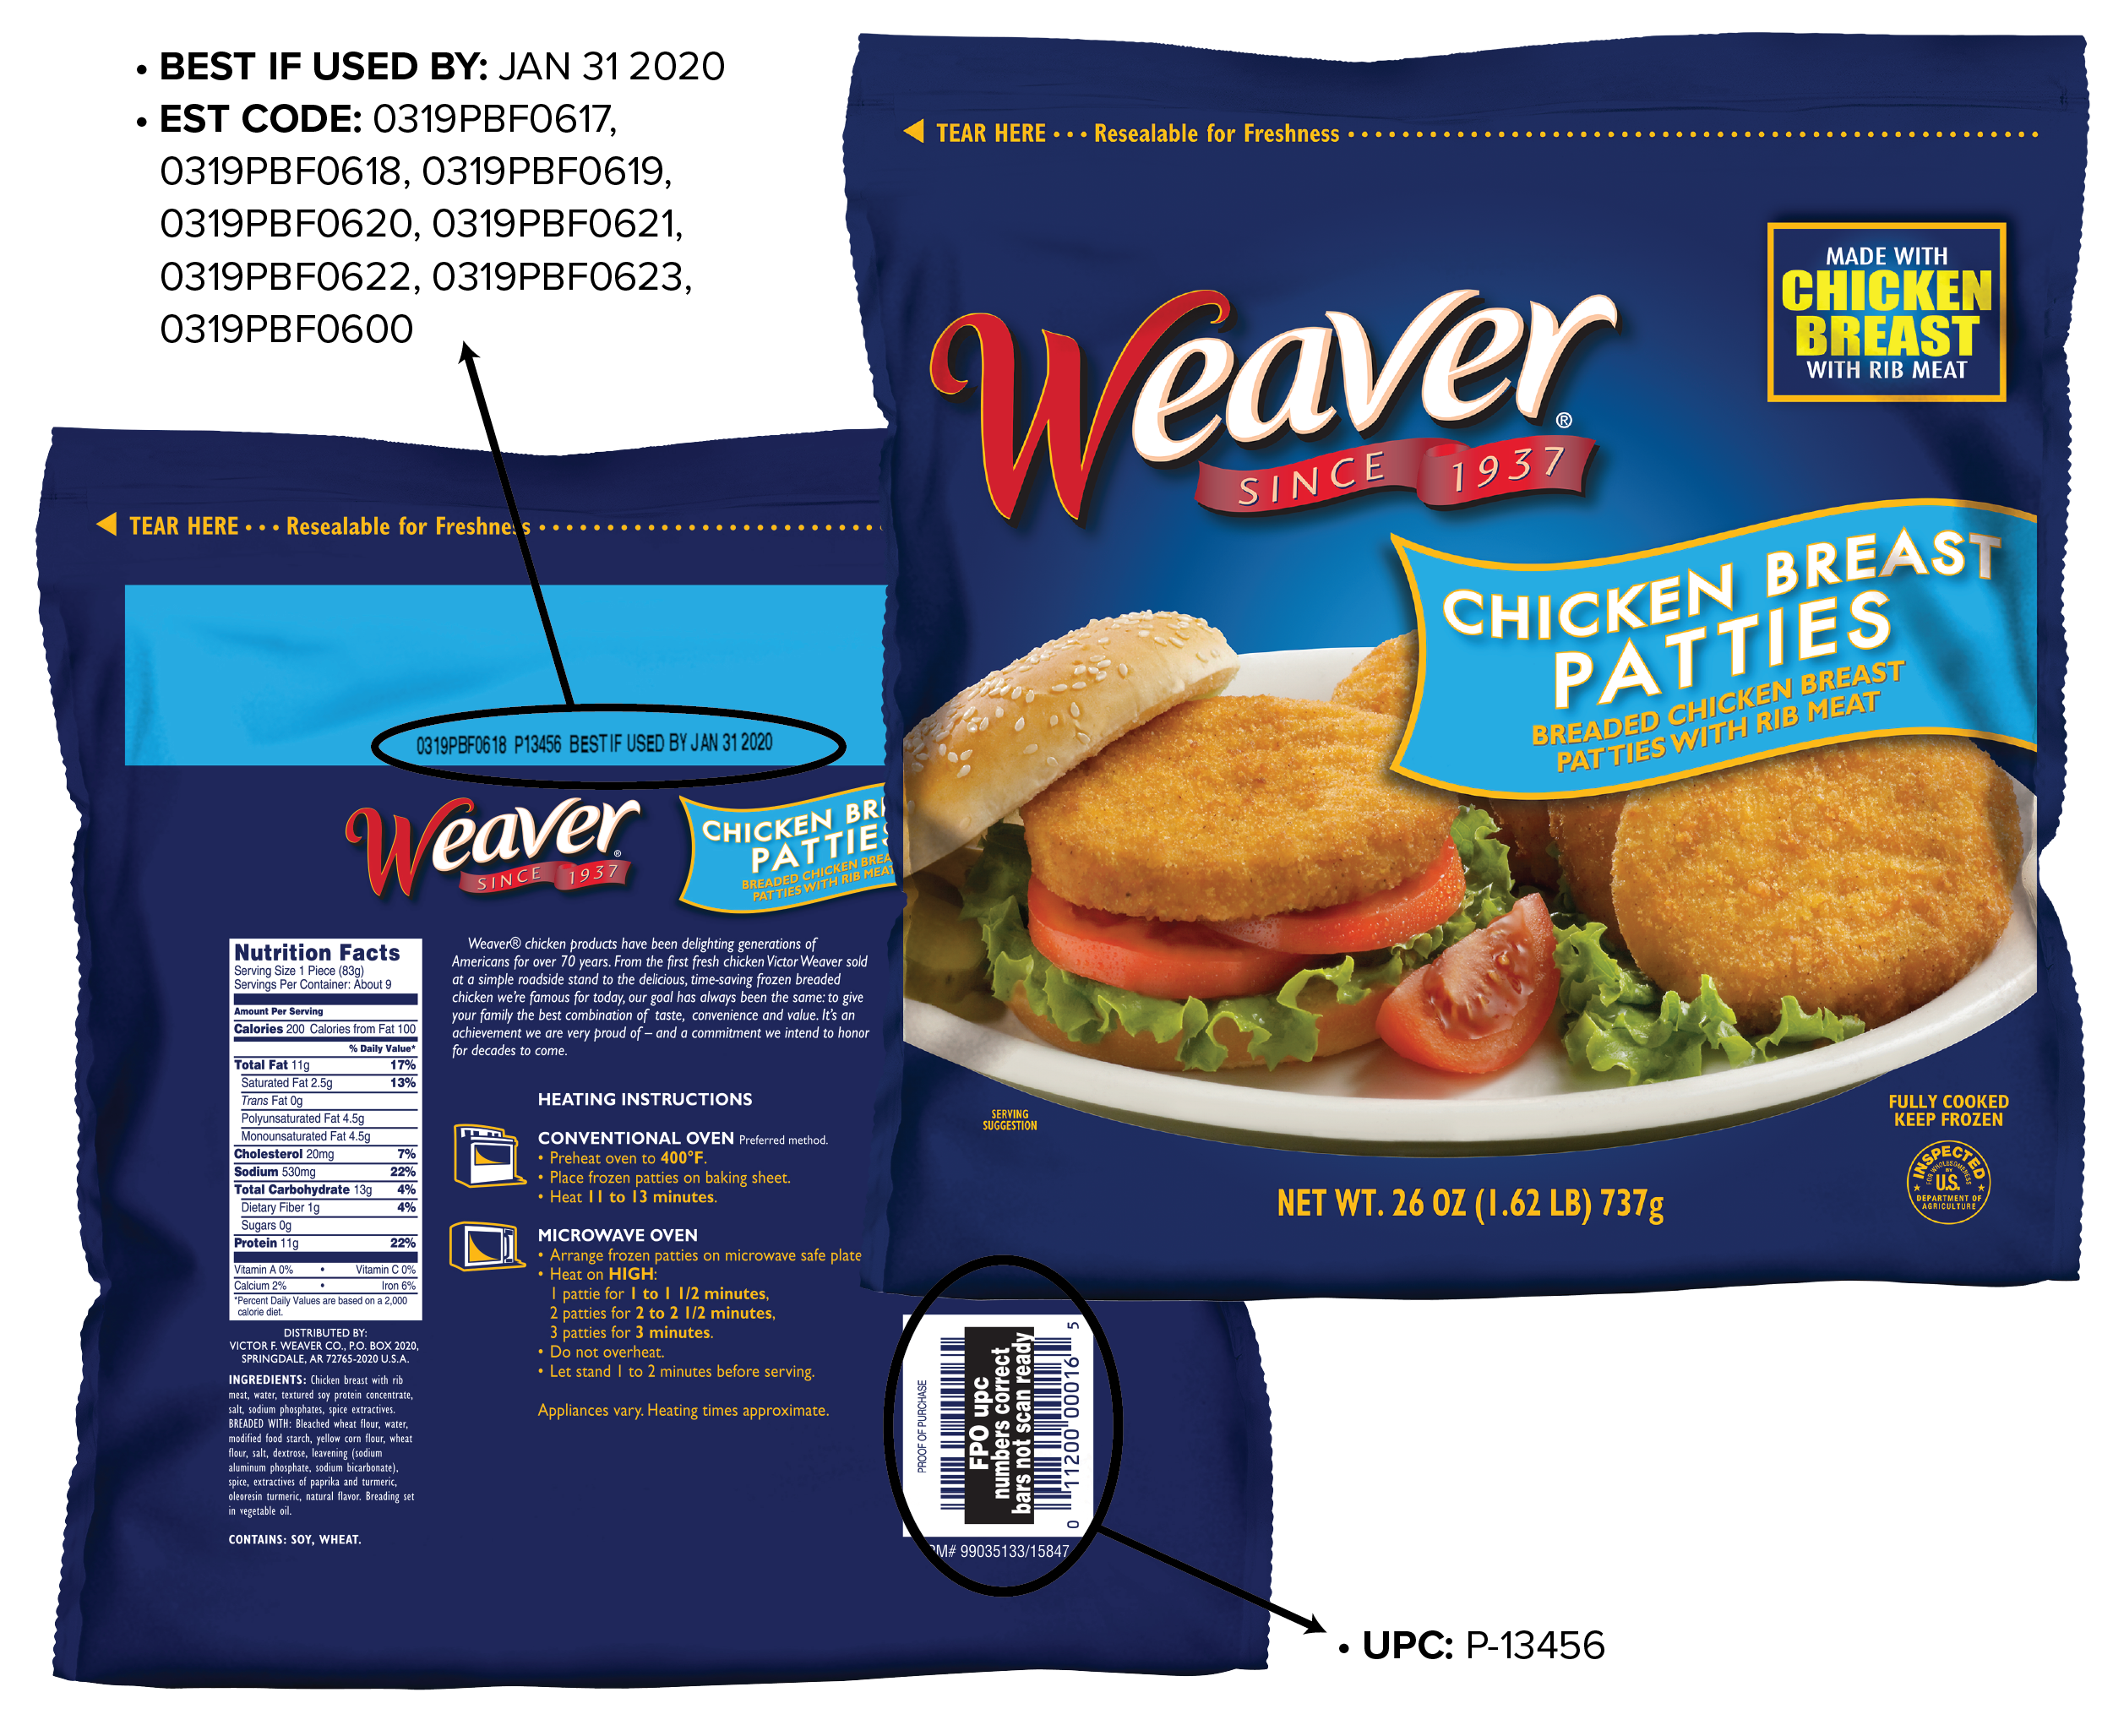 Where UPC and date code locations are on the Weaver® Brand Chicken Patties package.